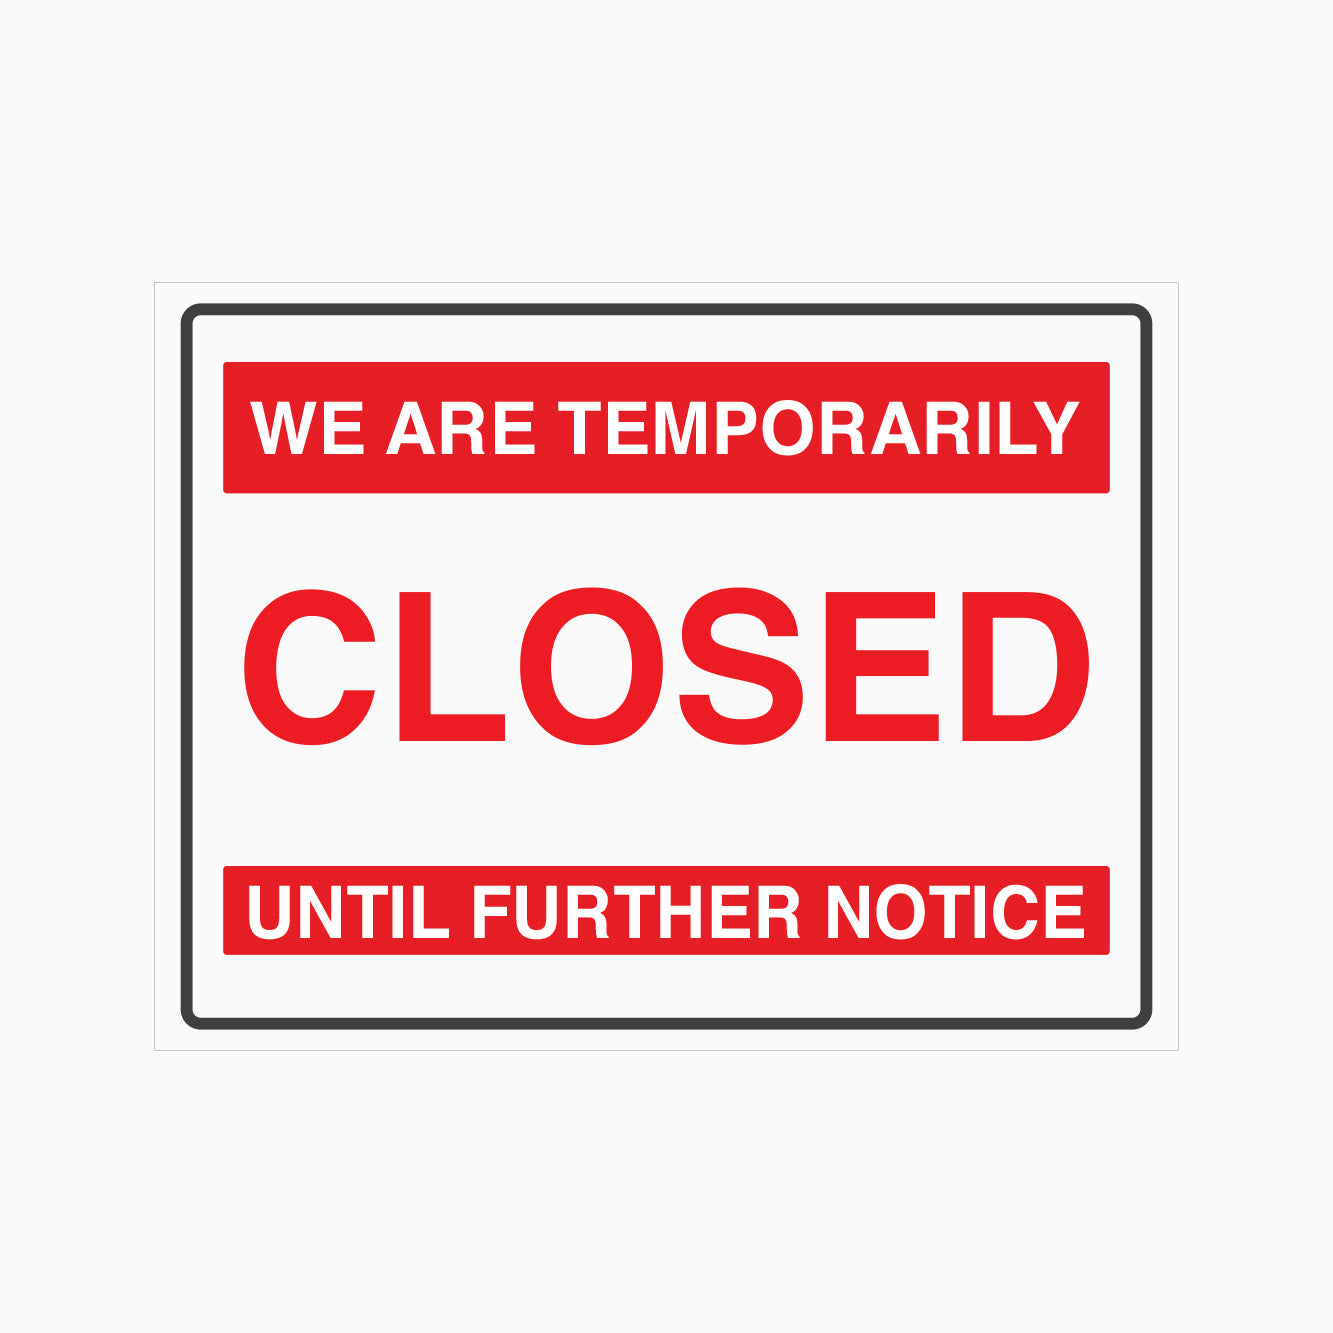 WE ARE TEMPORARILY CLOSED UNTIL FURTHER NOTICE SIGN 